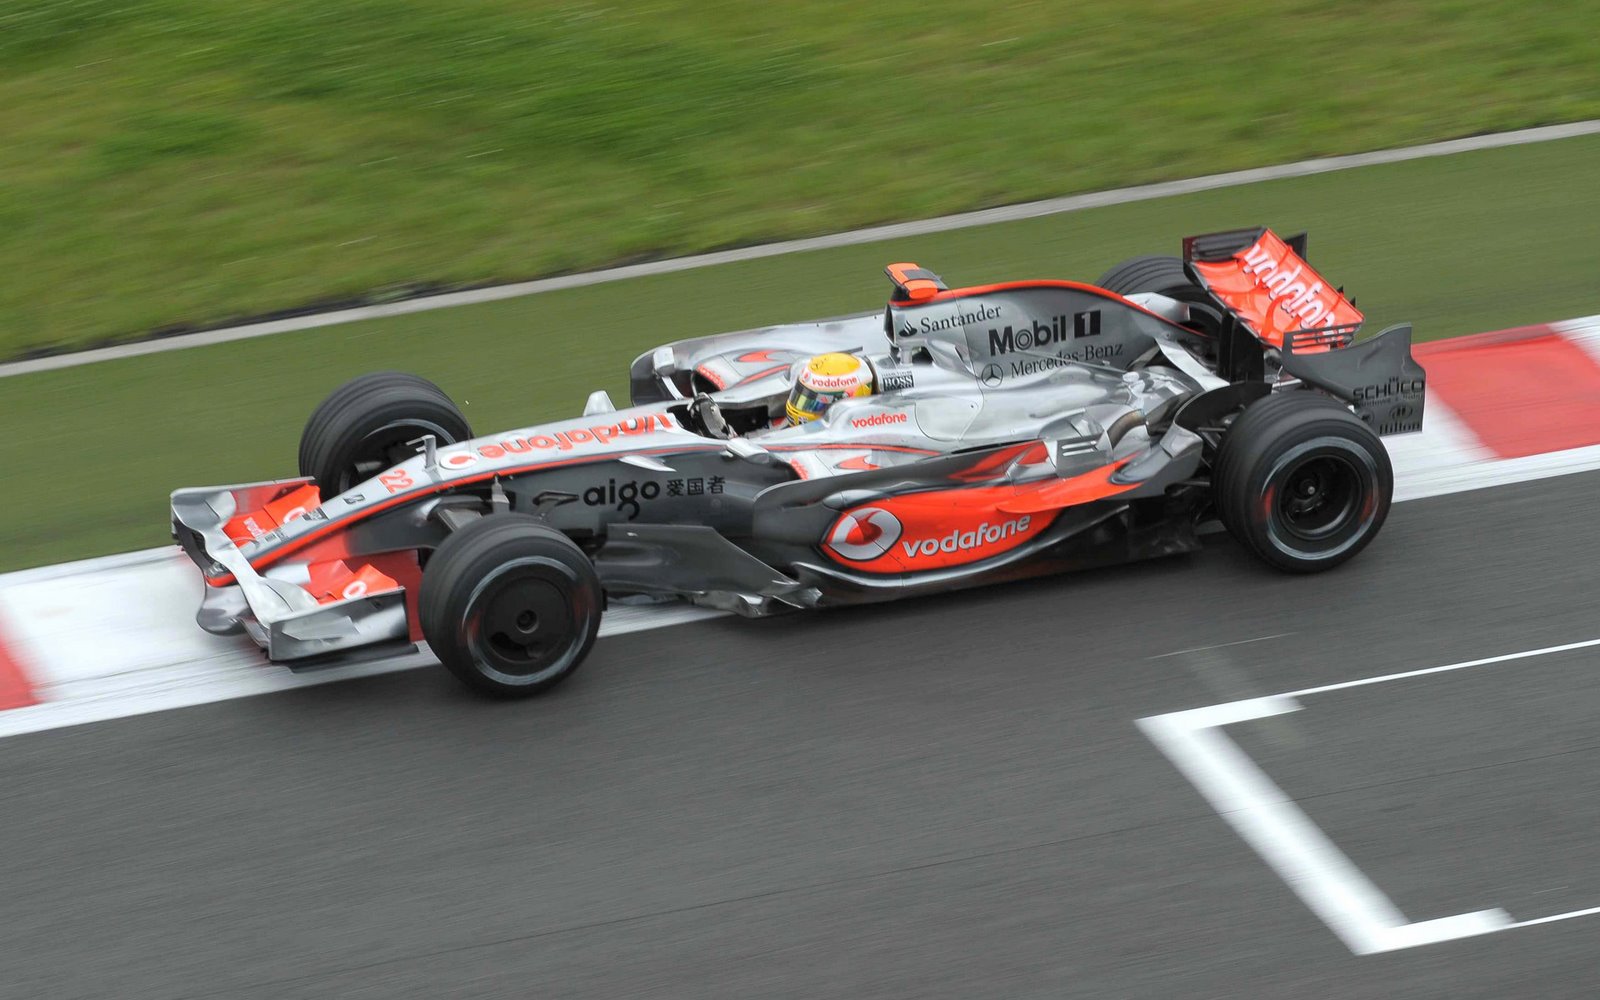 [Lewis+Hamilton+McLaren+Mercedes+Saturday+Qualifying+session+France+Magny+Cours,+F1+2008++17.jpg]